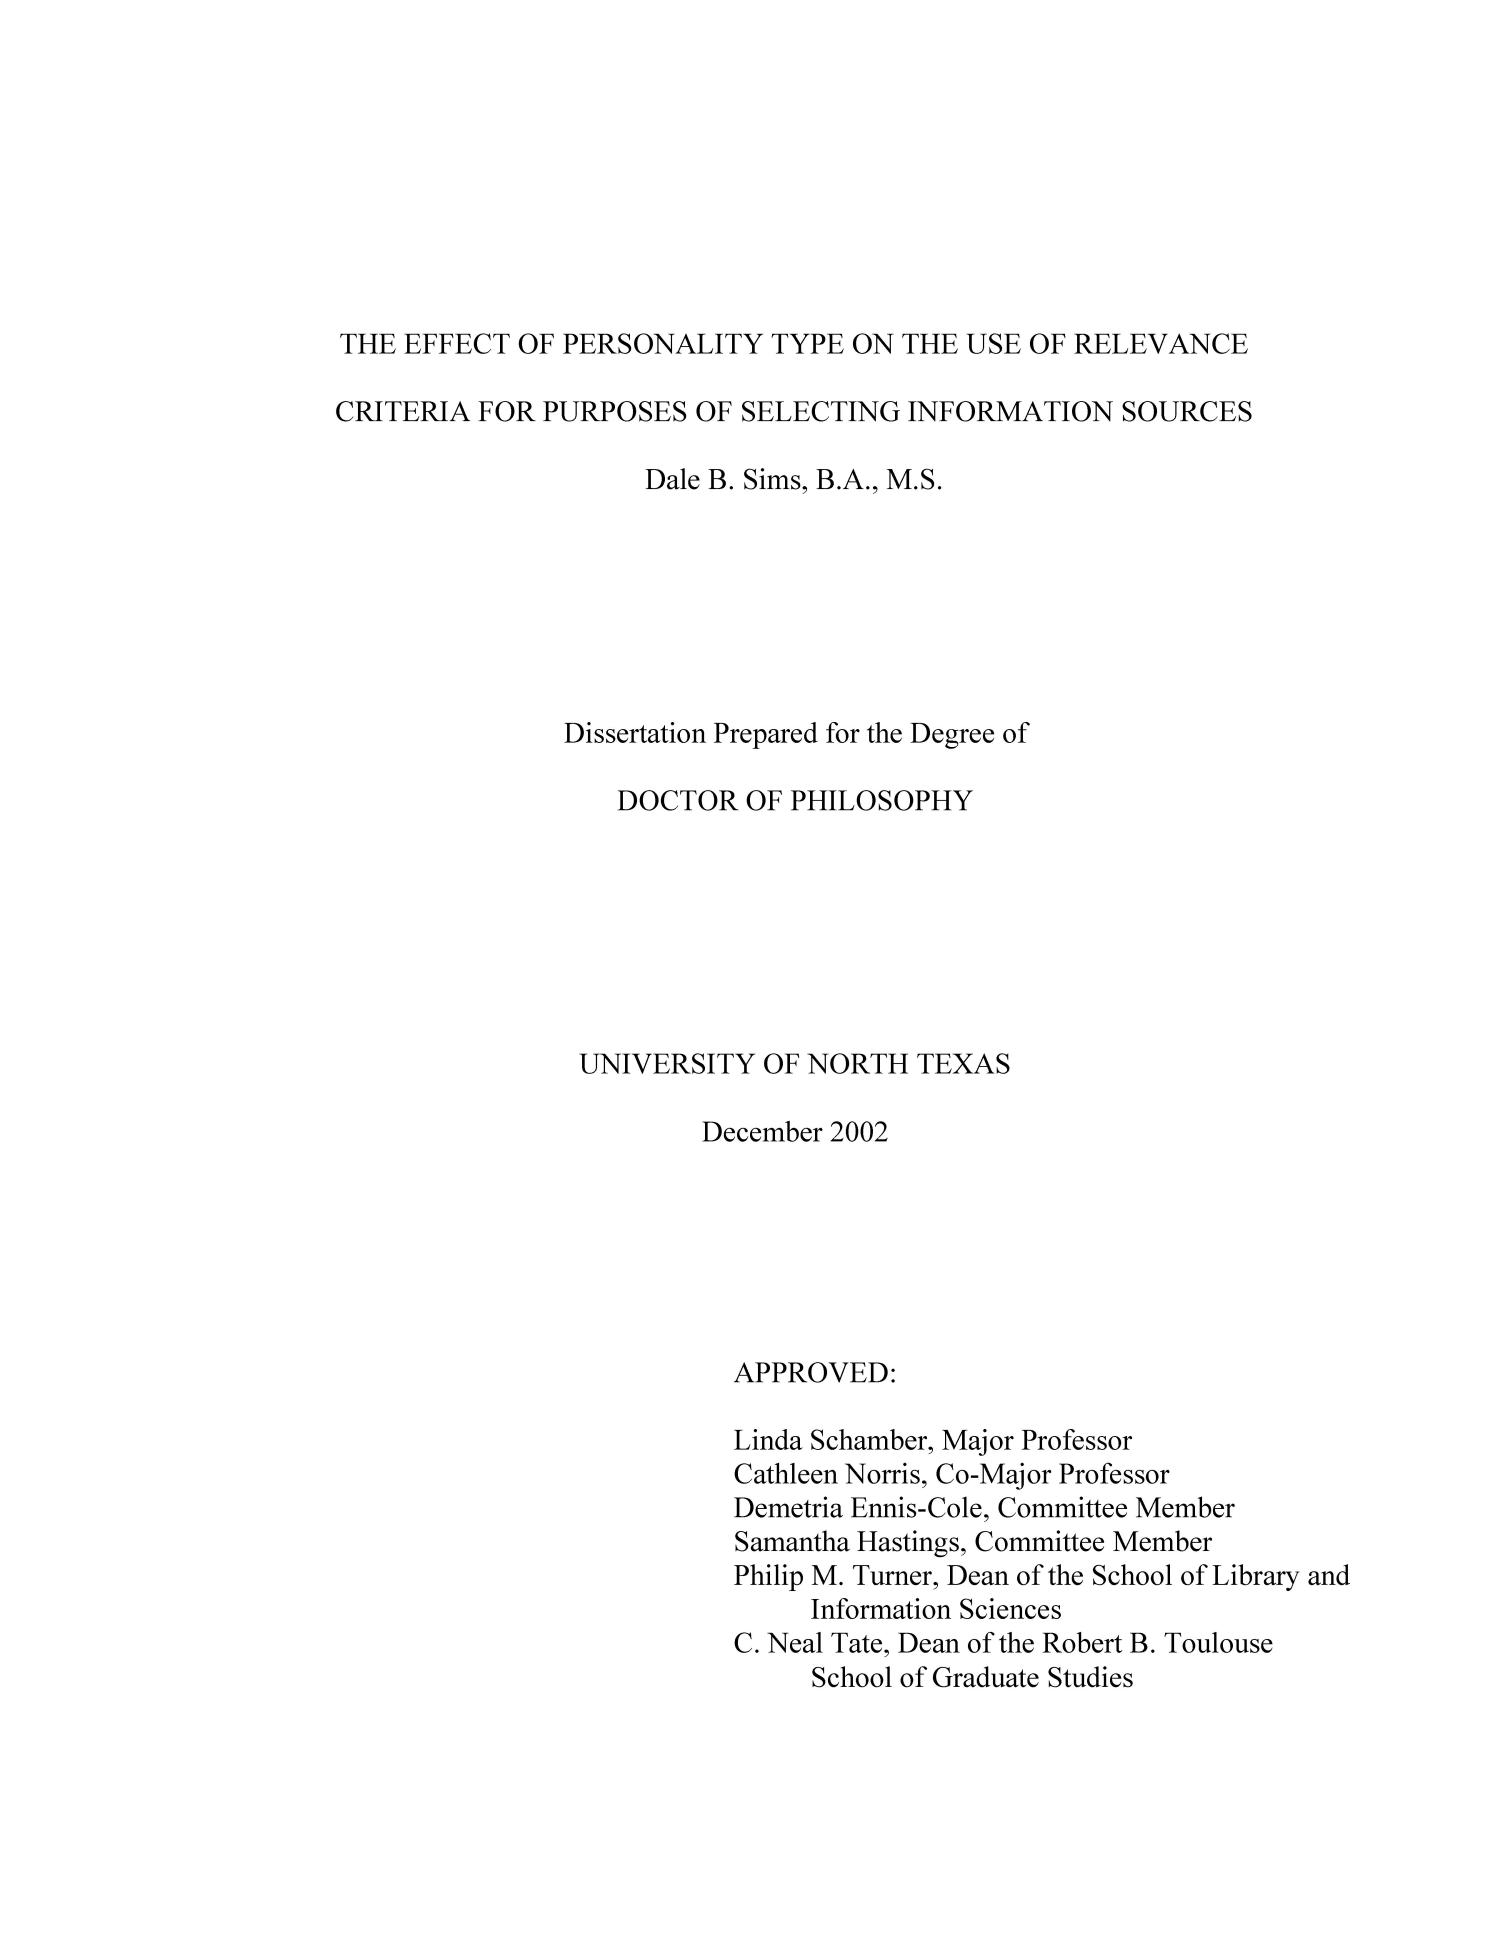 The Effect of Personality Type on the Use of Relevance Criteria for Purposes of Selecting Information Sources.
                                                
                                                    Title Page
                                                